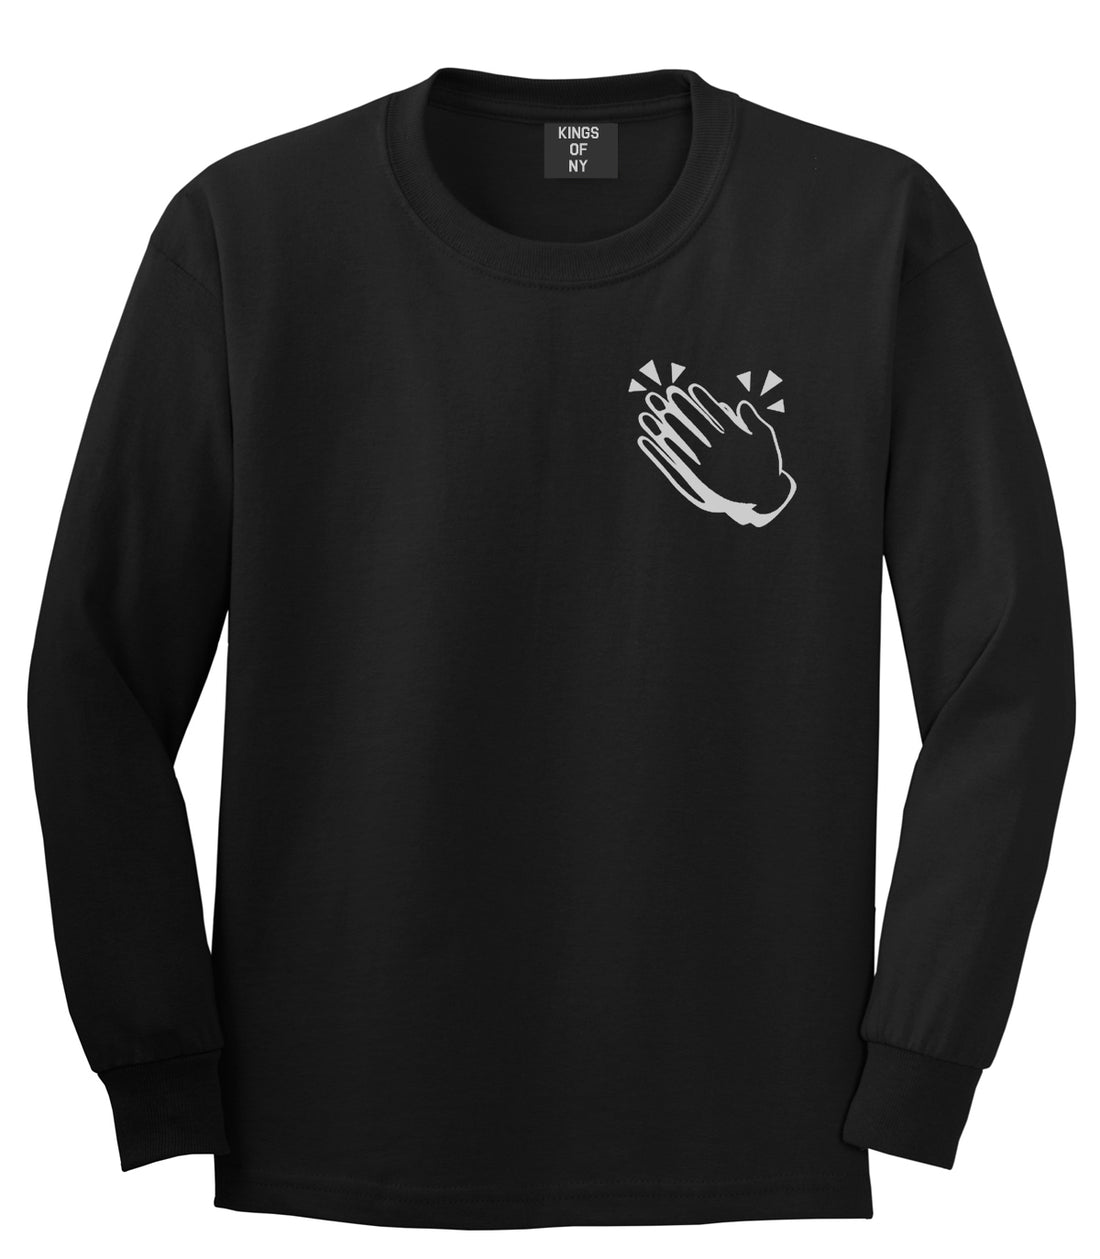 Clapping Hands Emoji Chest Mens Black Long Sleeve T-Shirt by Kings Of NY